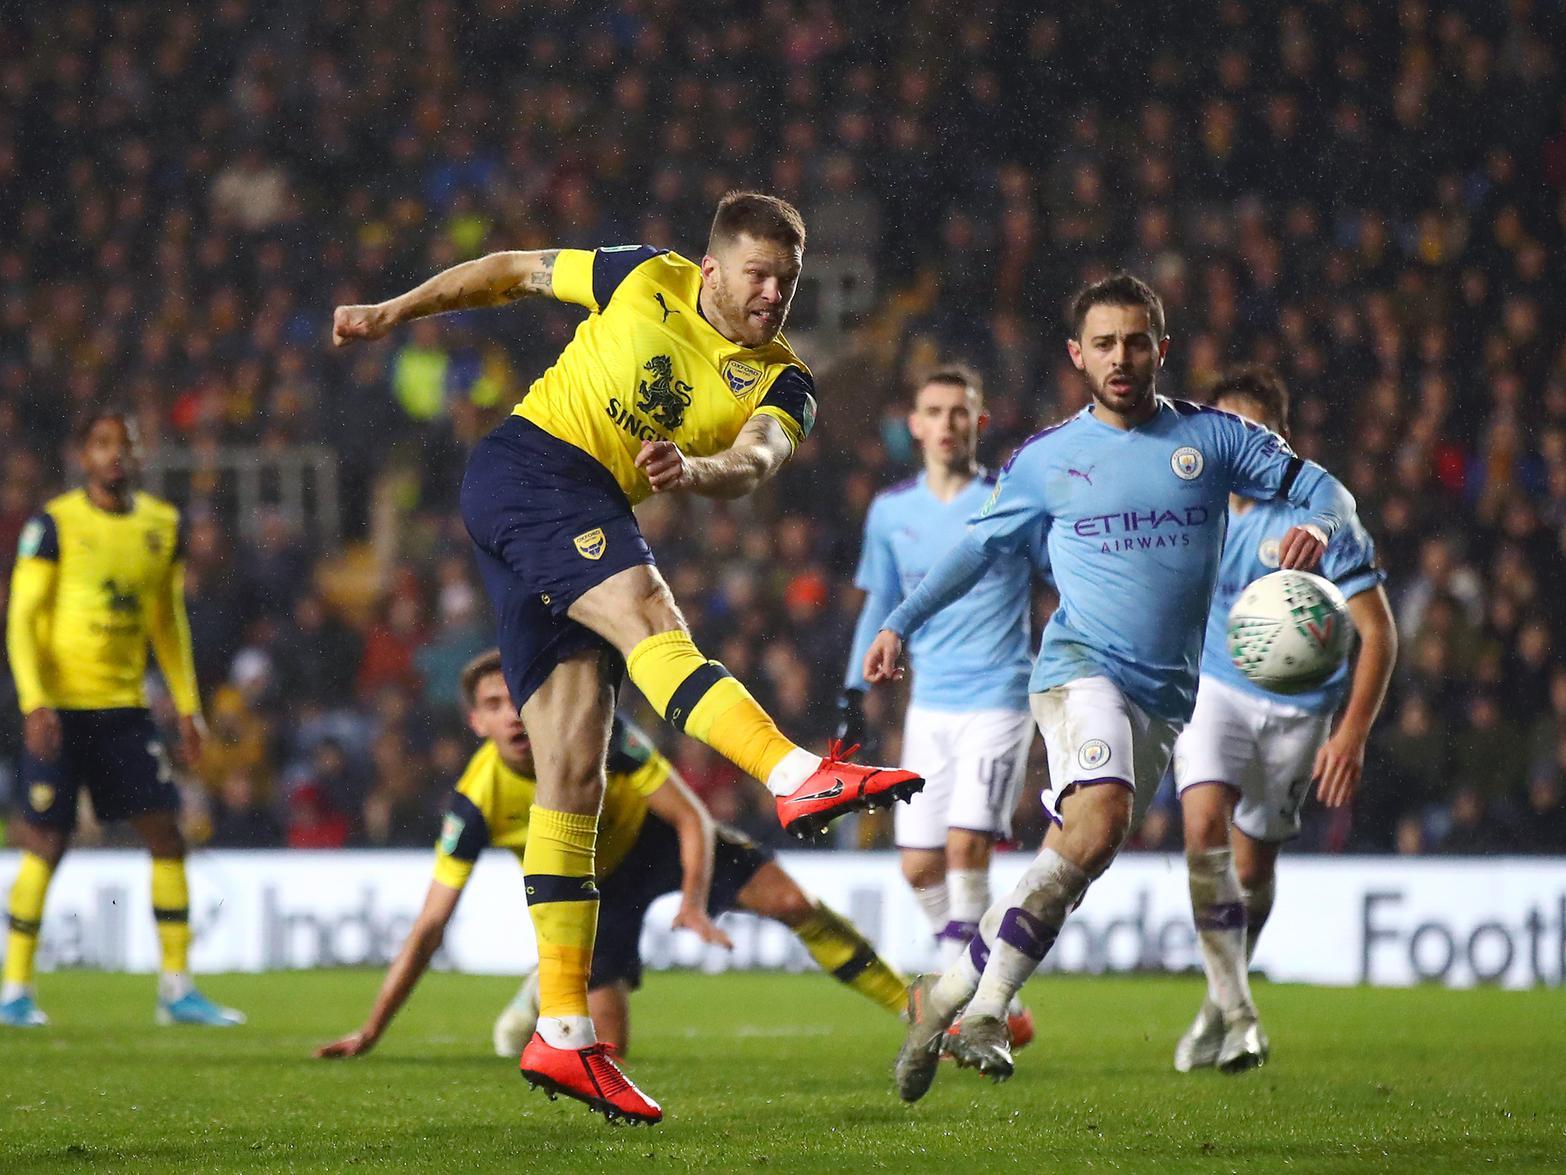 Netted a 23rd minute winner for Oxford United as they beat league leaders Wycombe Wanderers.